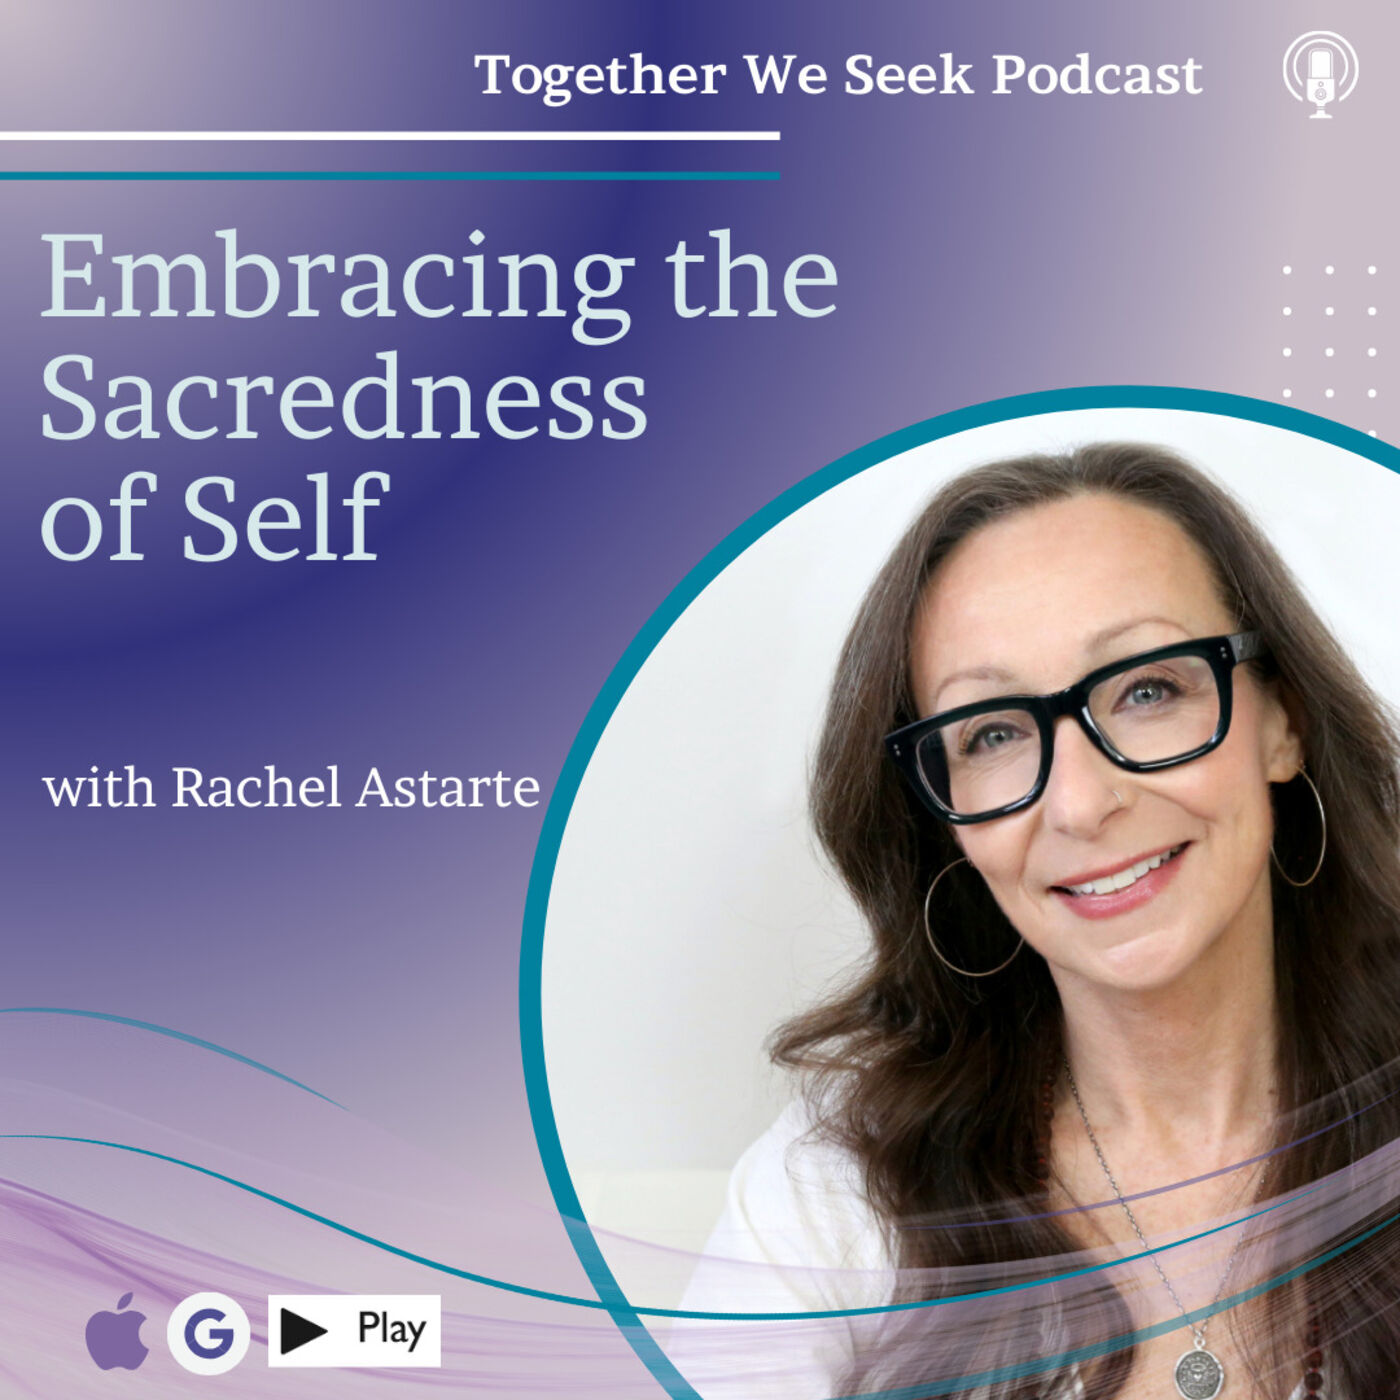 Embracing the Sacredness of Self: After 50 Yrs Old with Rachel Astarte